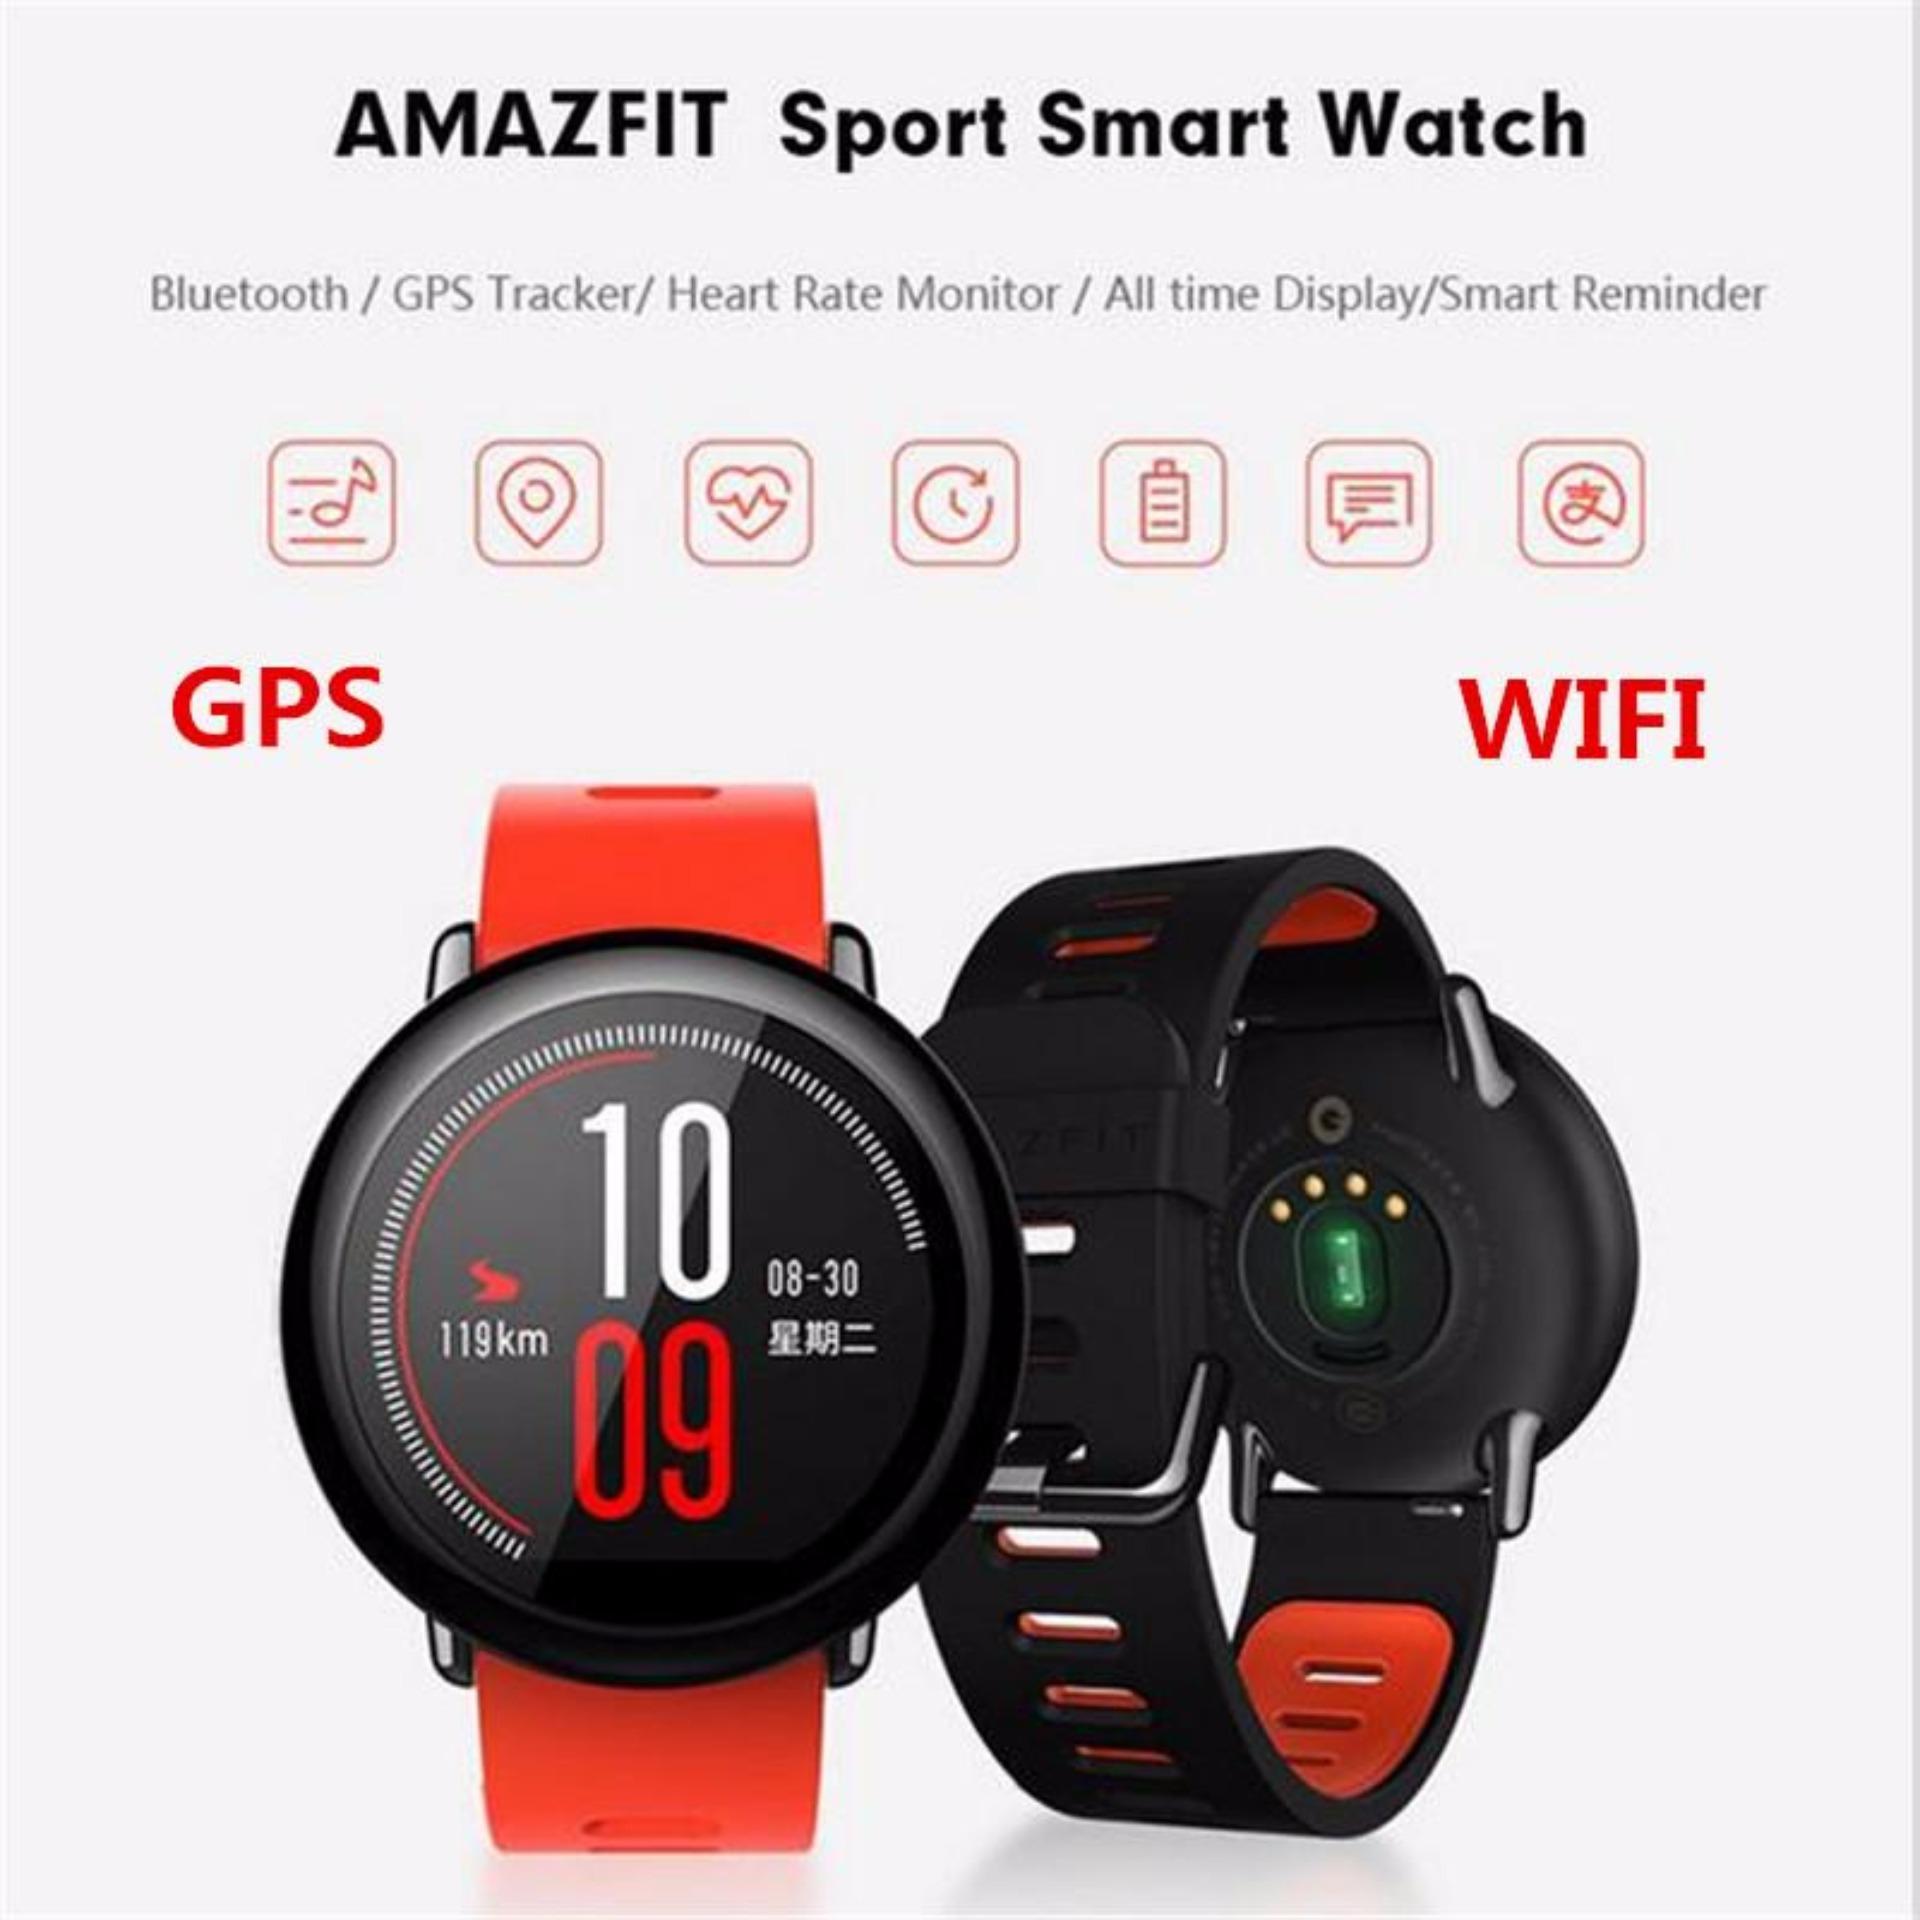 Xiaomi Amazfit Smartwatch International Version with GPS and Heart Rate Sensor - 100% English -Model No. A1612 -Red